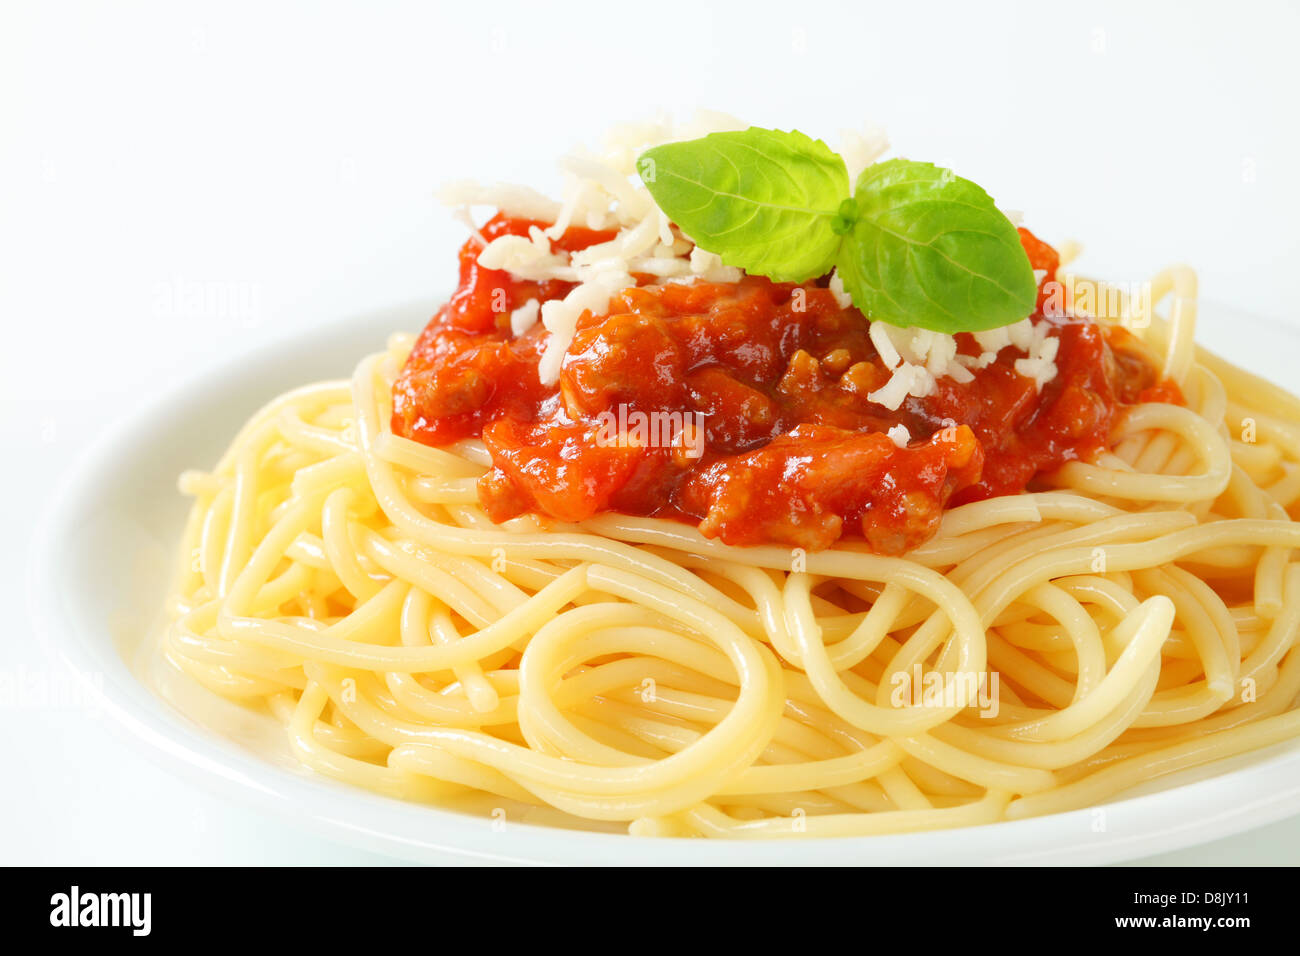 Spaghetti with meat-based tomato sauce and cheese Stock Photo